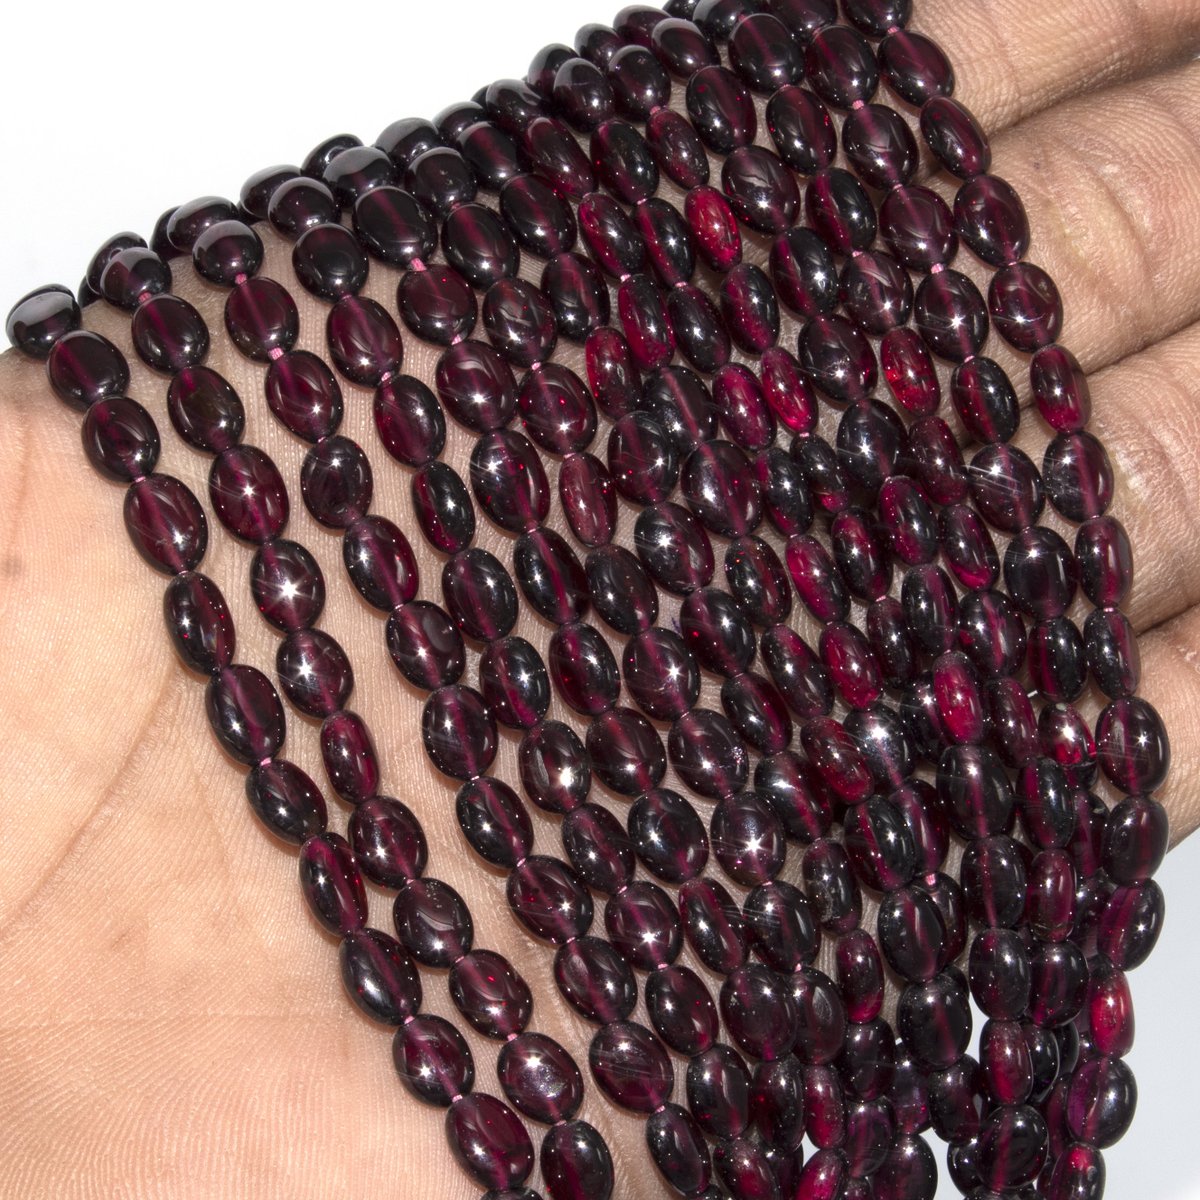 Excited to share the latest addition to my #etsy shop: Smooth Garnet Oval shape Beads Natural Garnet Plain beads for jewelry making Handmade Polished Garnet beads 20 'Strand 5-7 mm etsy.me/3J0rouc #red #christmas #rondelle #hatmakinghaircrafts #beachtropical #g